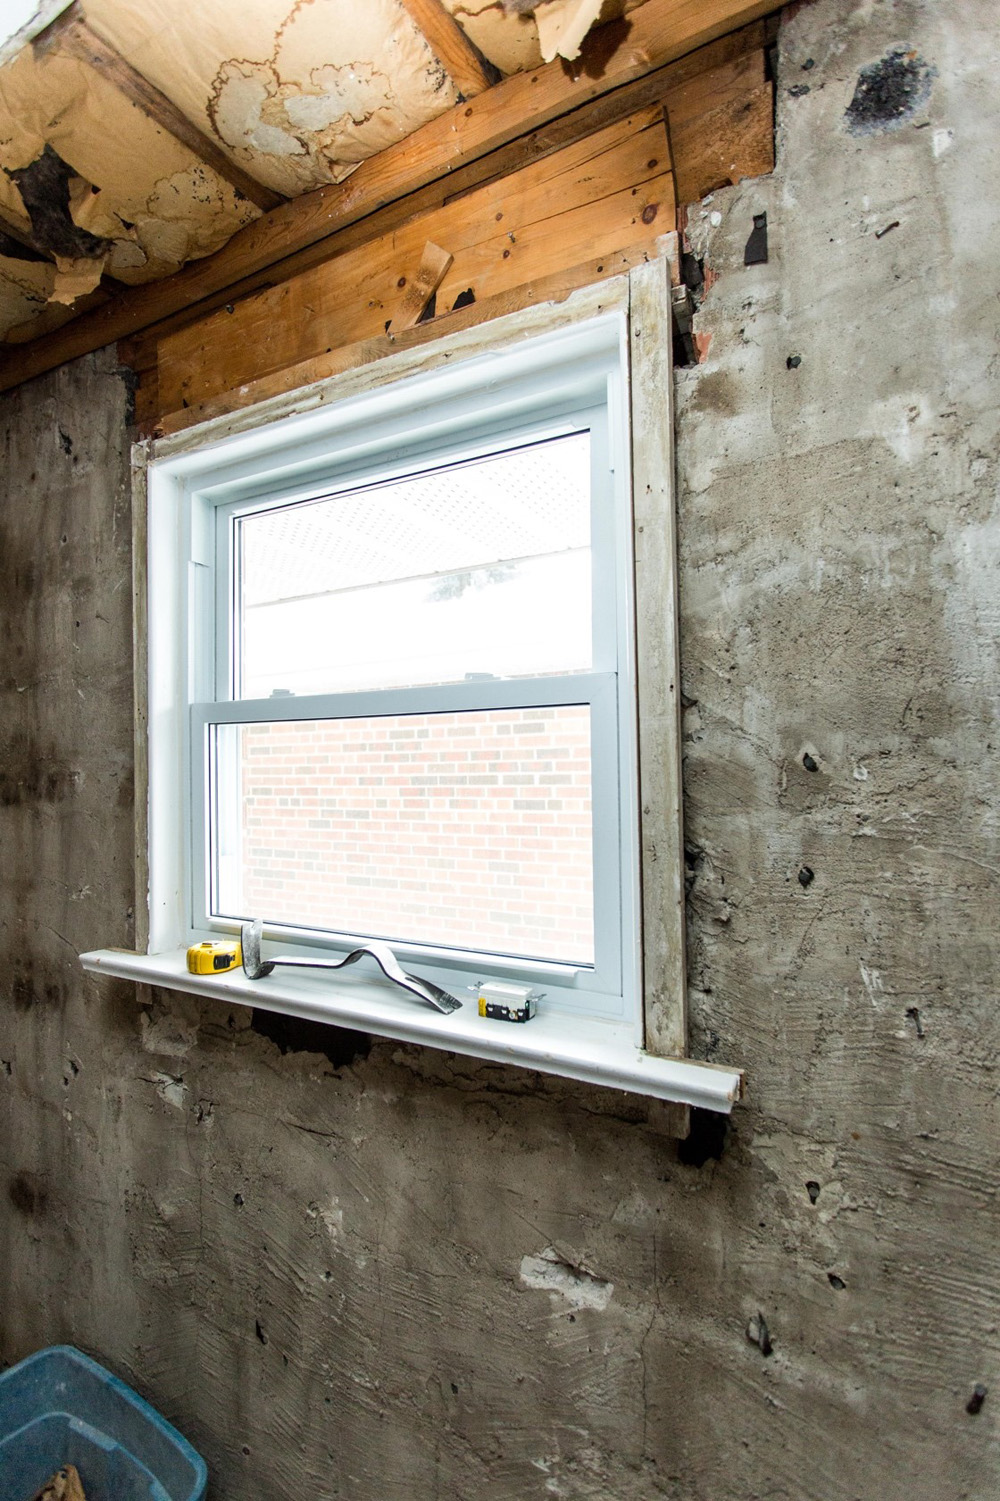 A window in a renovated home with poor ventilation